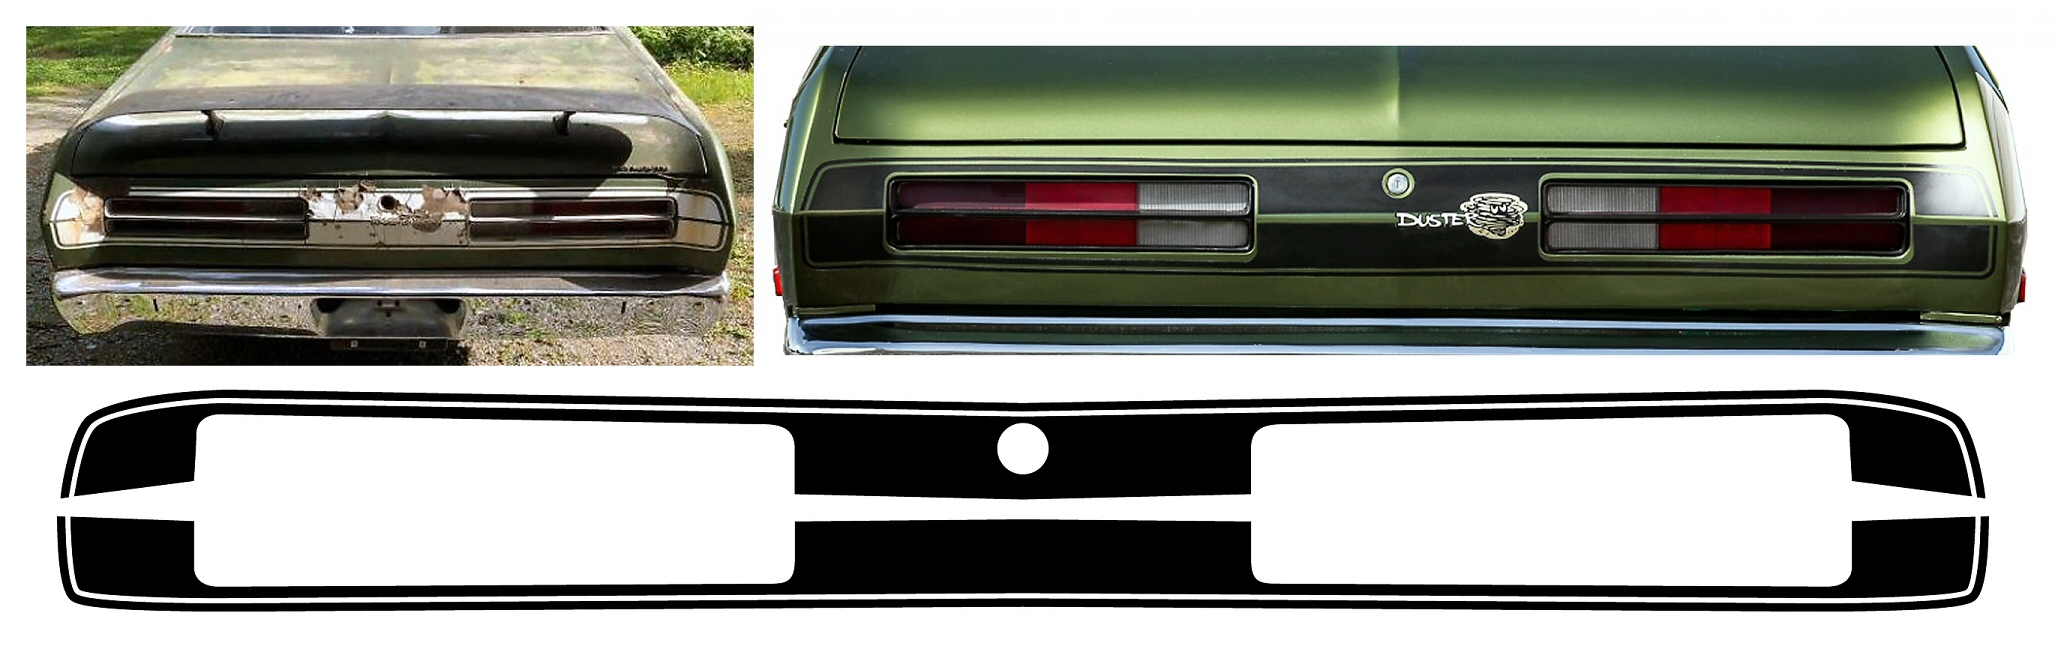 New Reproduction Duster Stripe Kit 1972 Complete Sides and Rear Panel" 